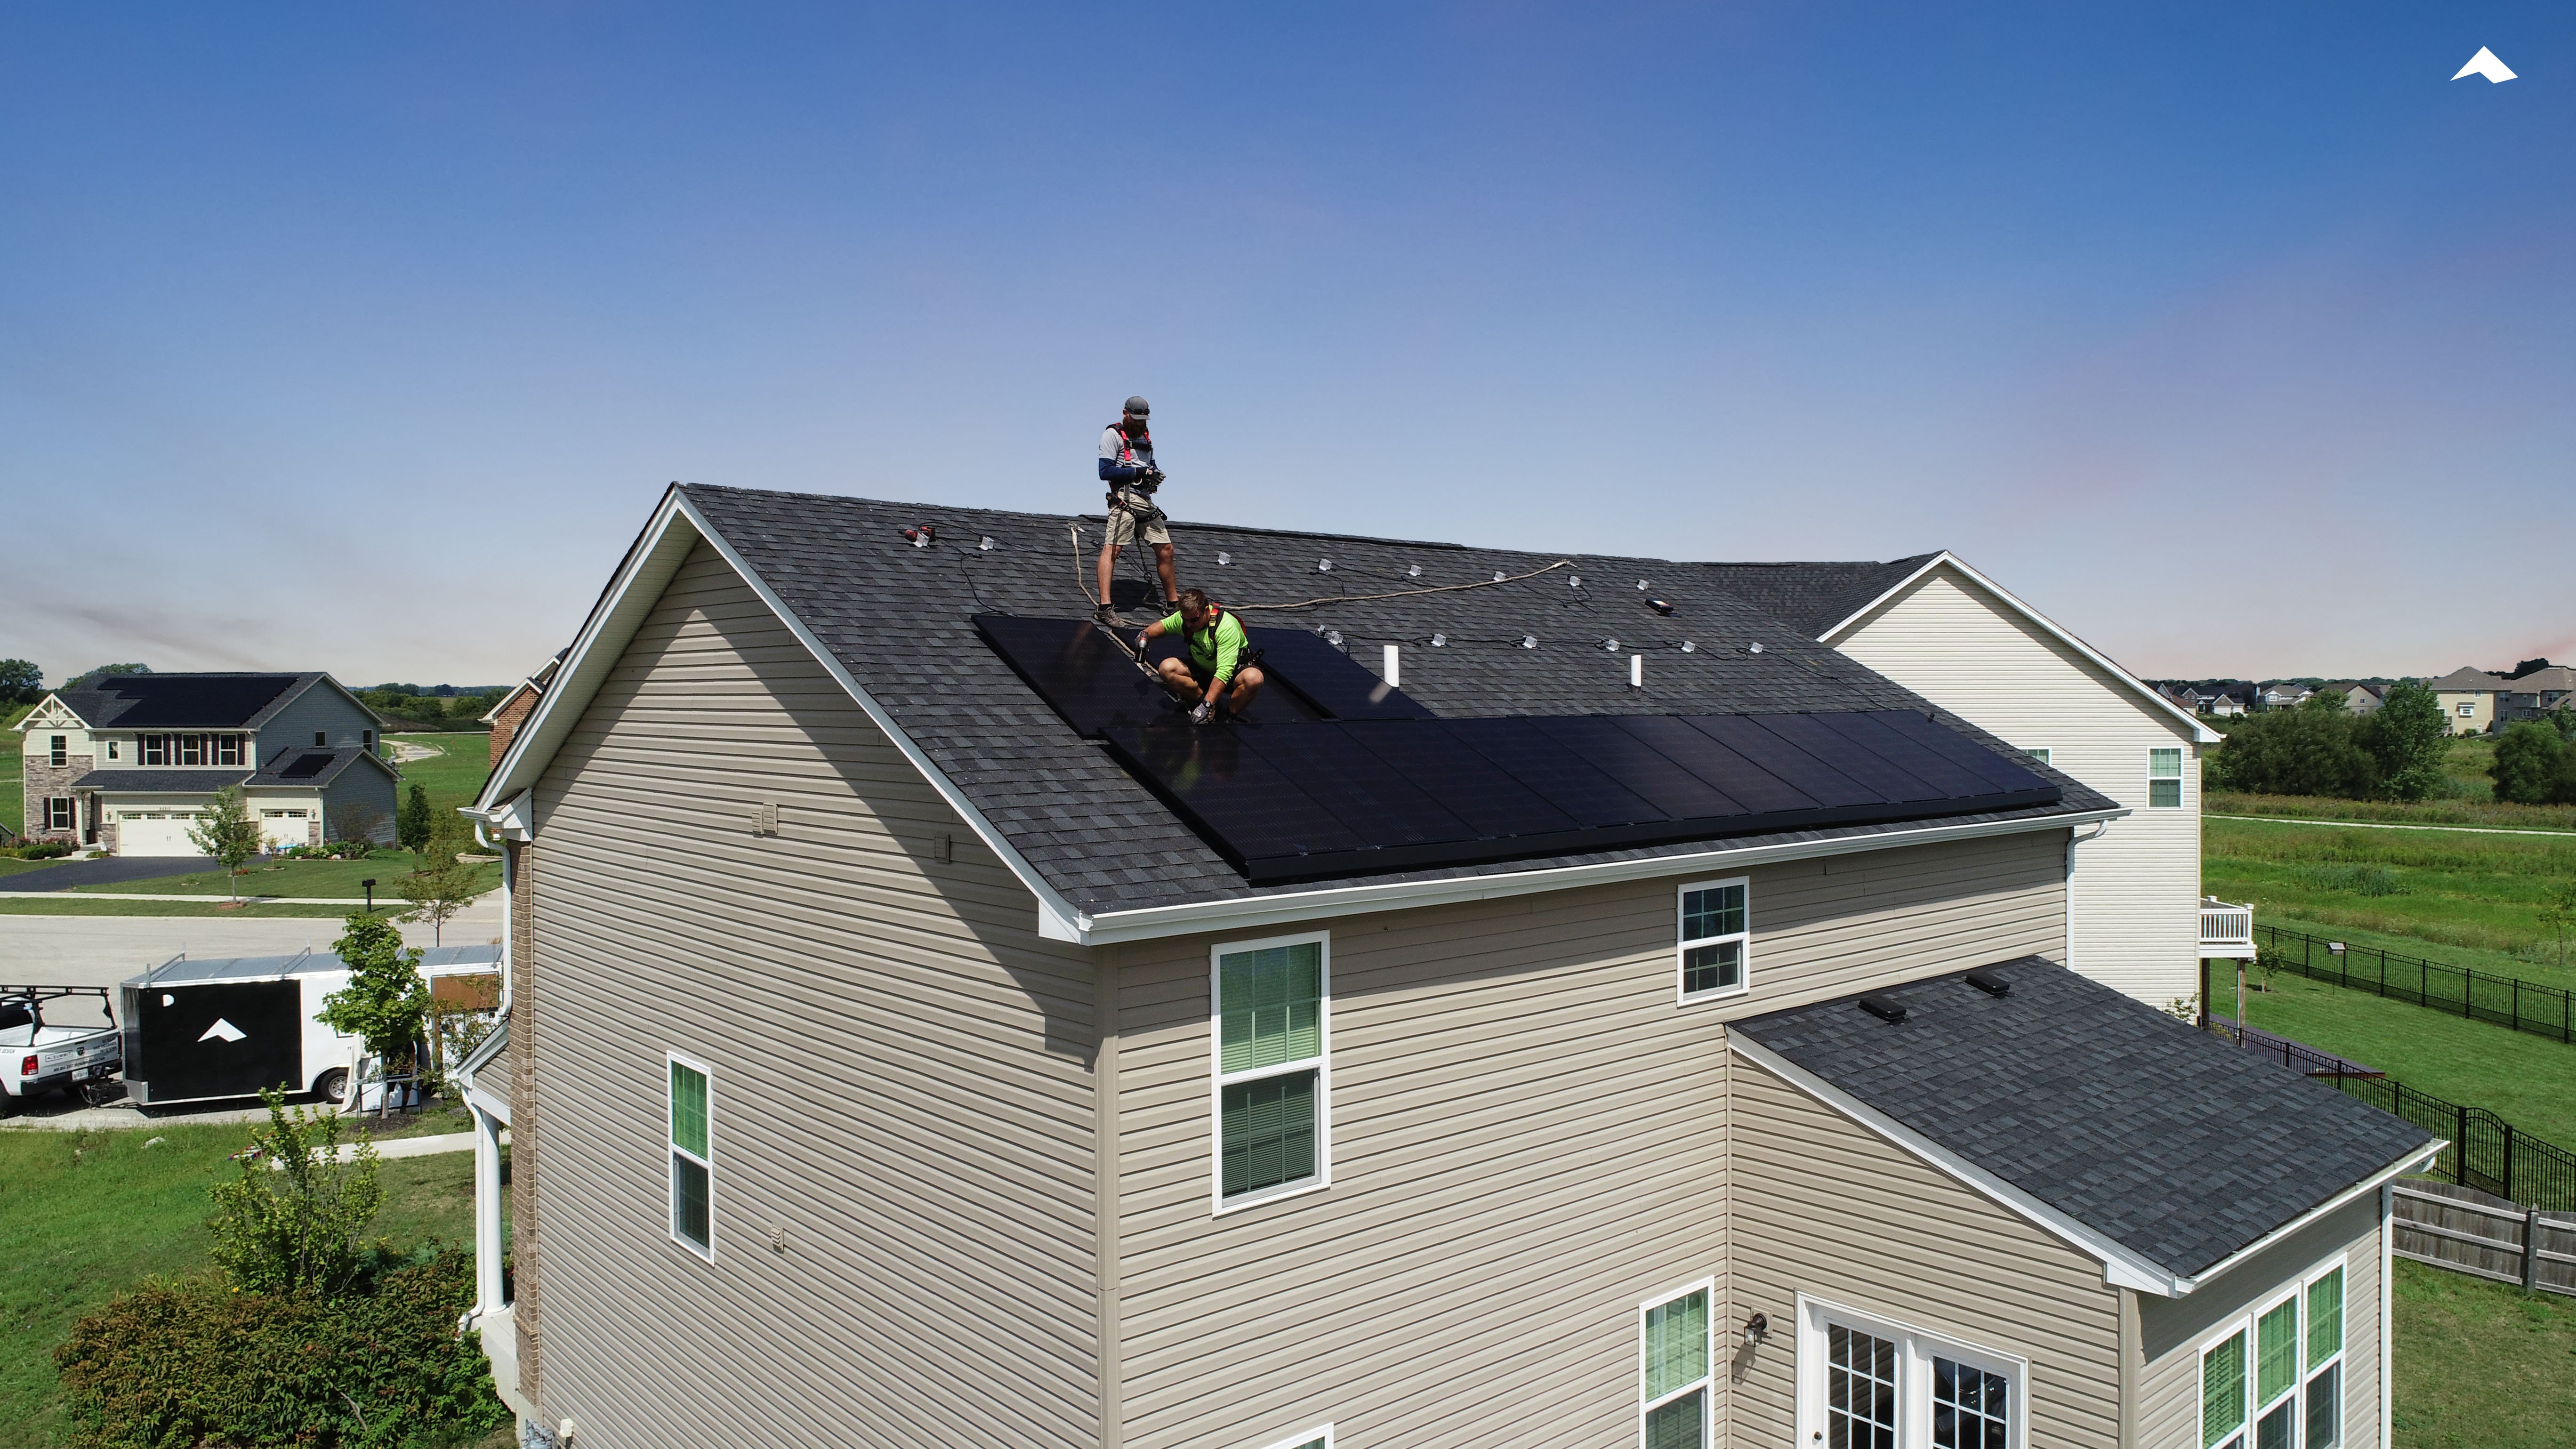 illinois-tax-rebates-for-solar-panels-electric-cars-save-money-and-the